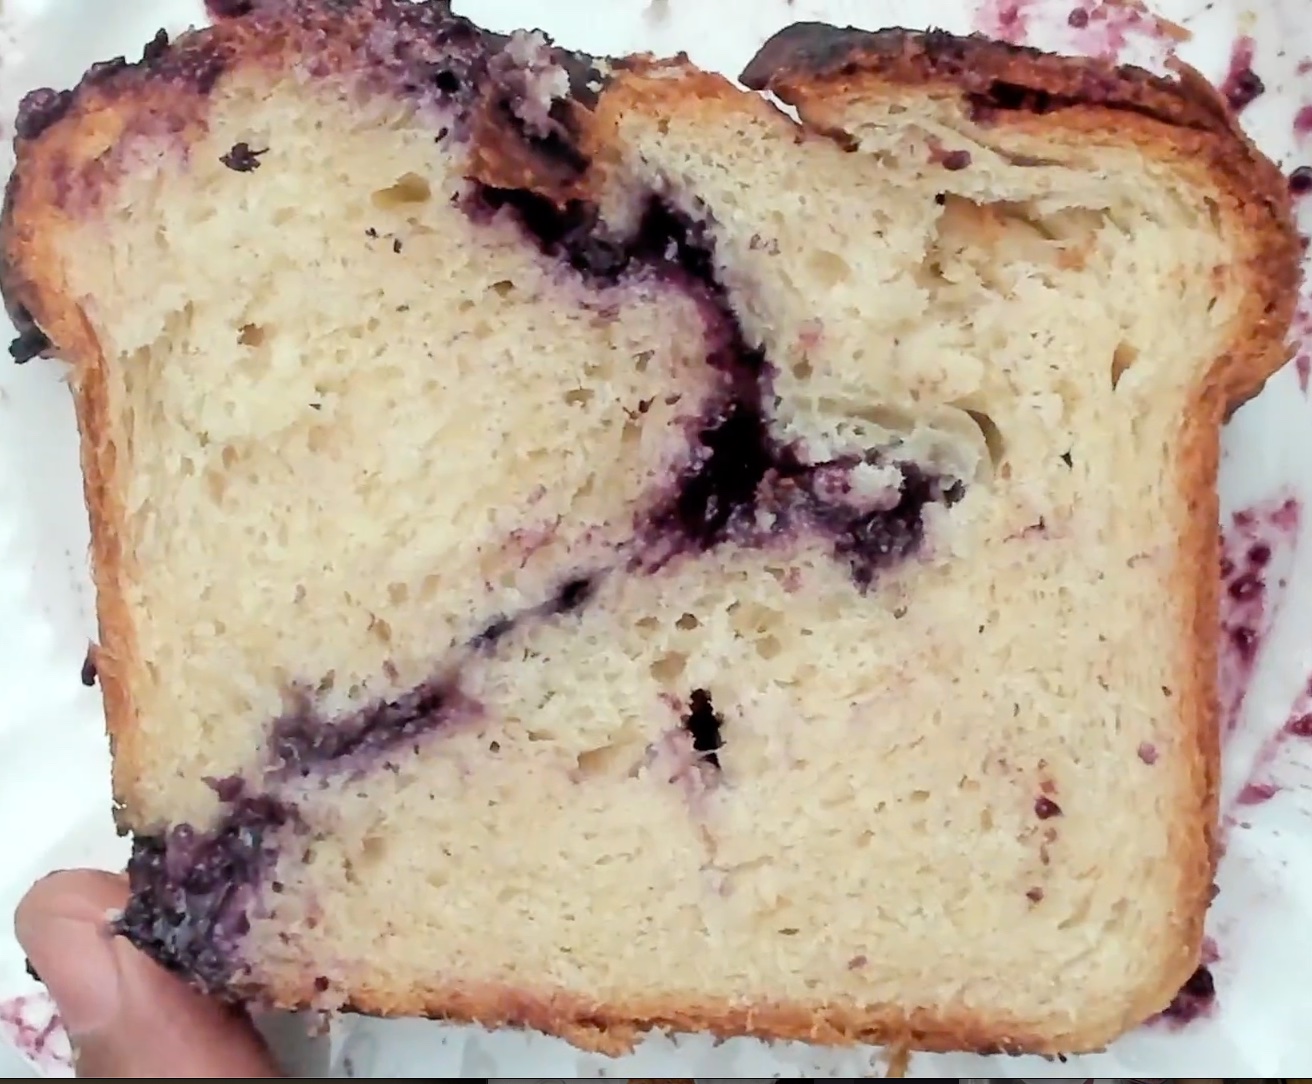 a cheese and blueberry encrusted slice of bread